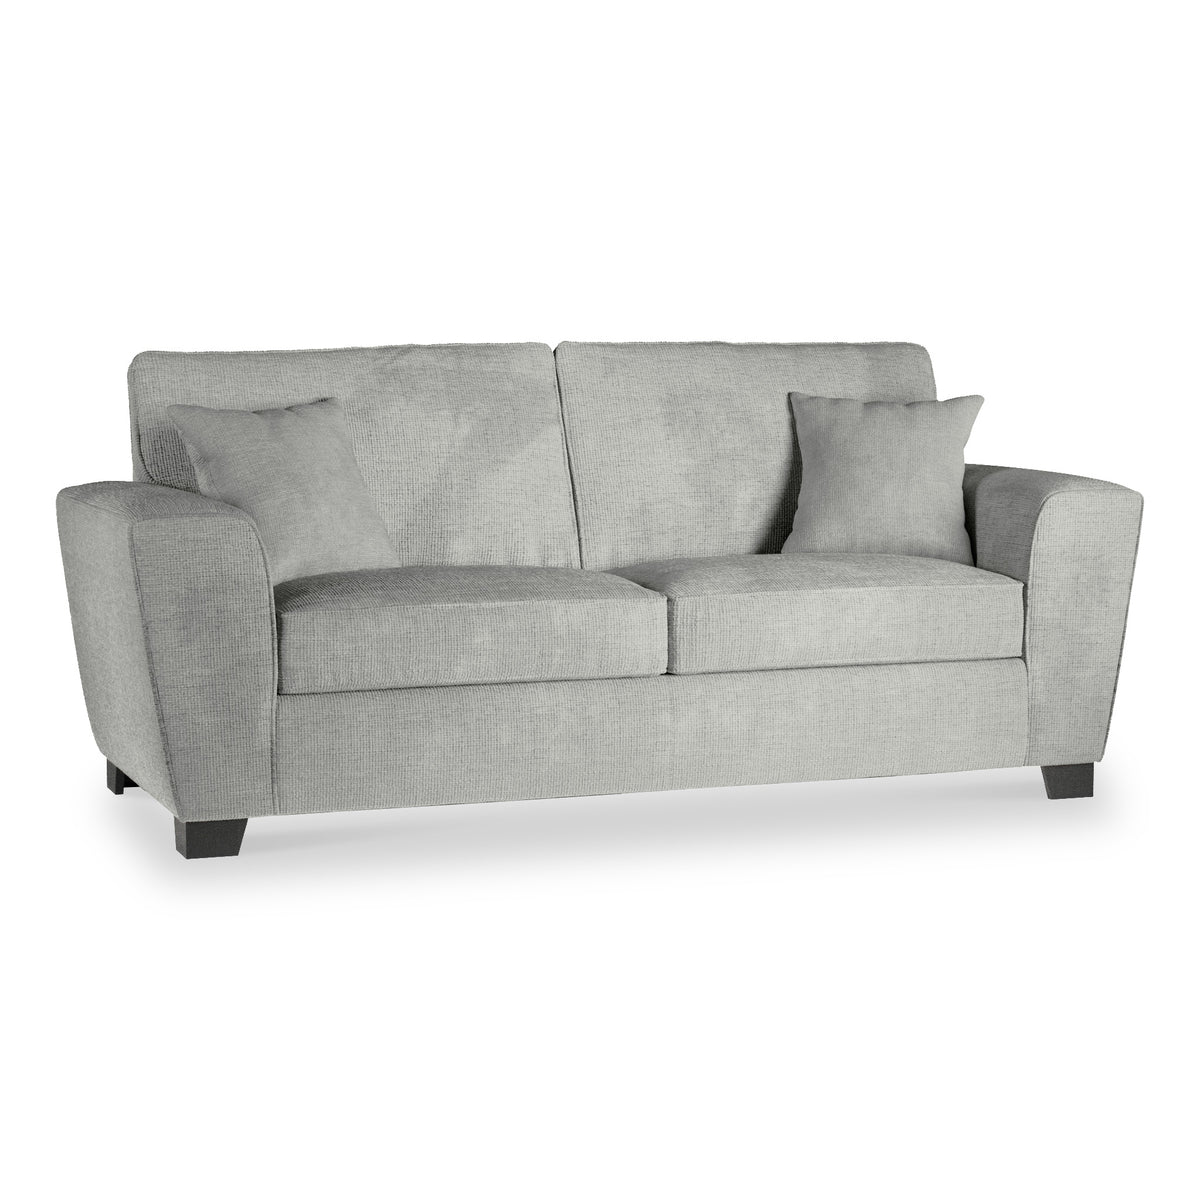 Chester Silver Hopsack 3 Seater Sofa from Roseland Furniture